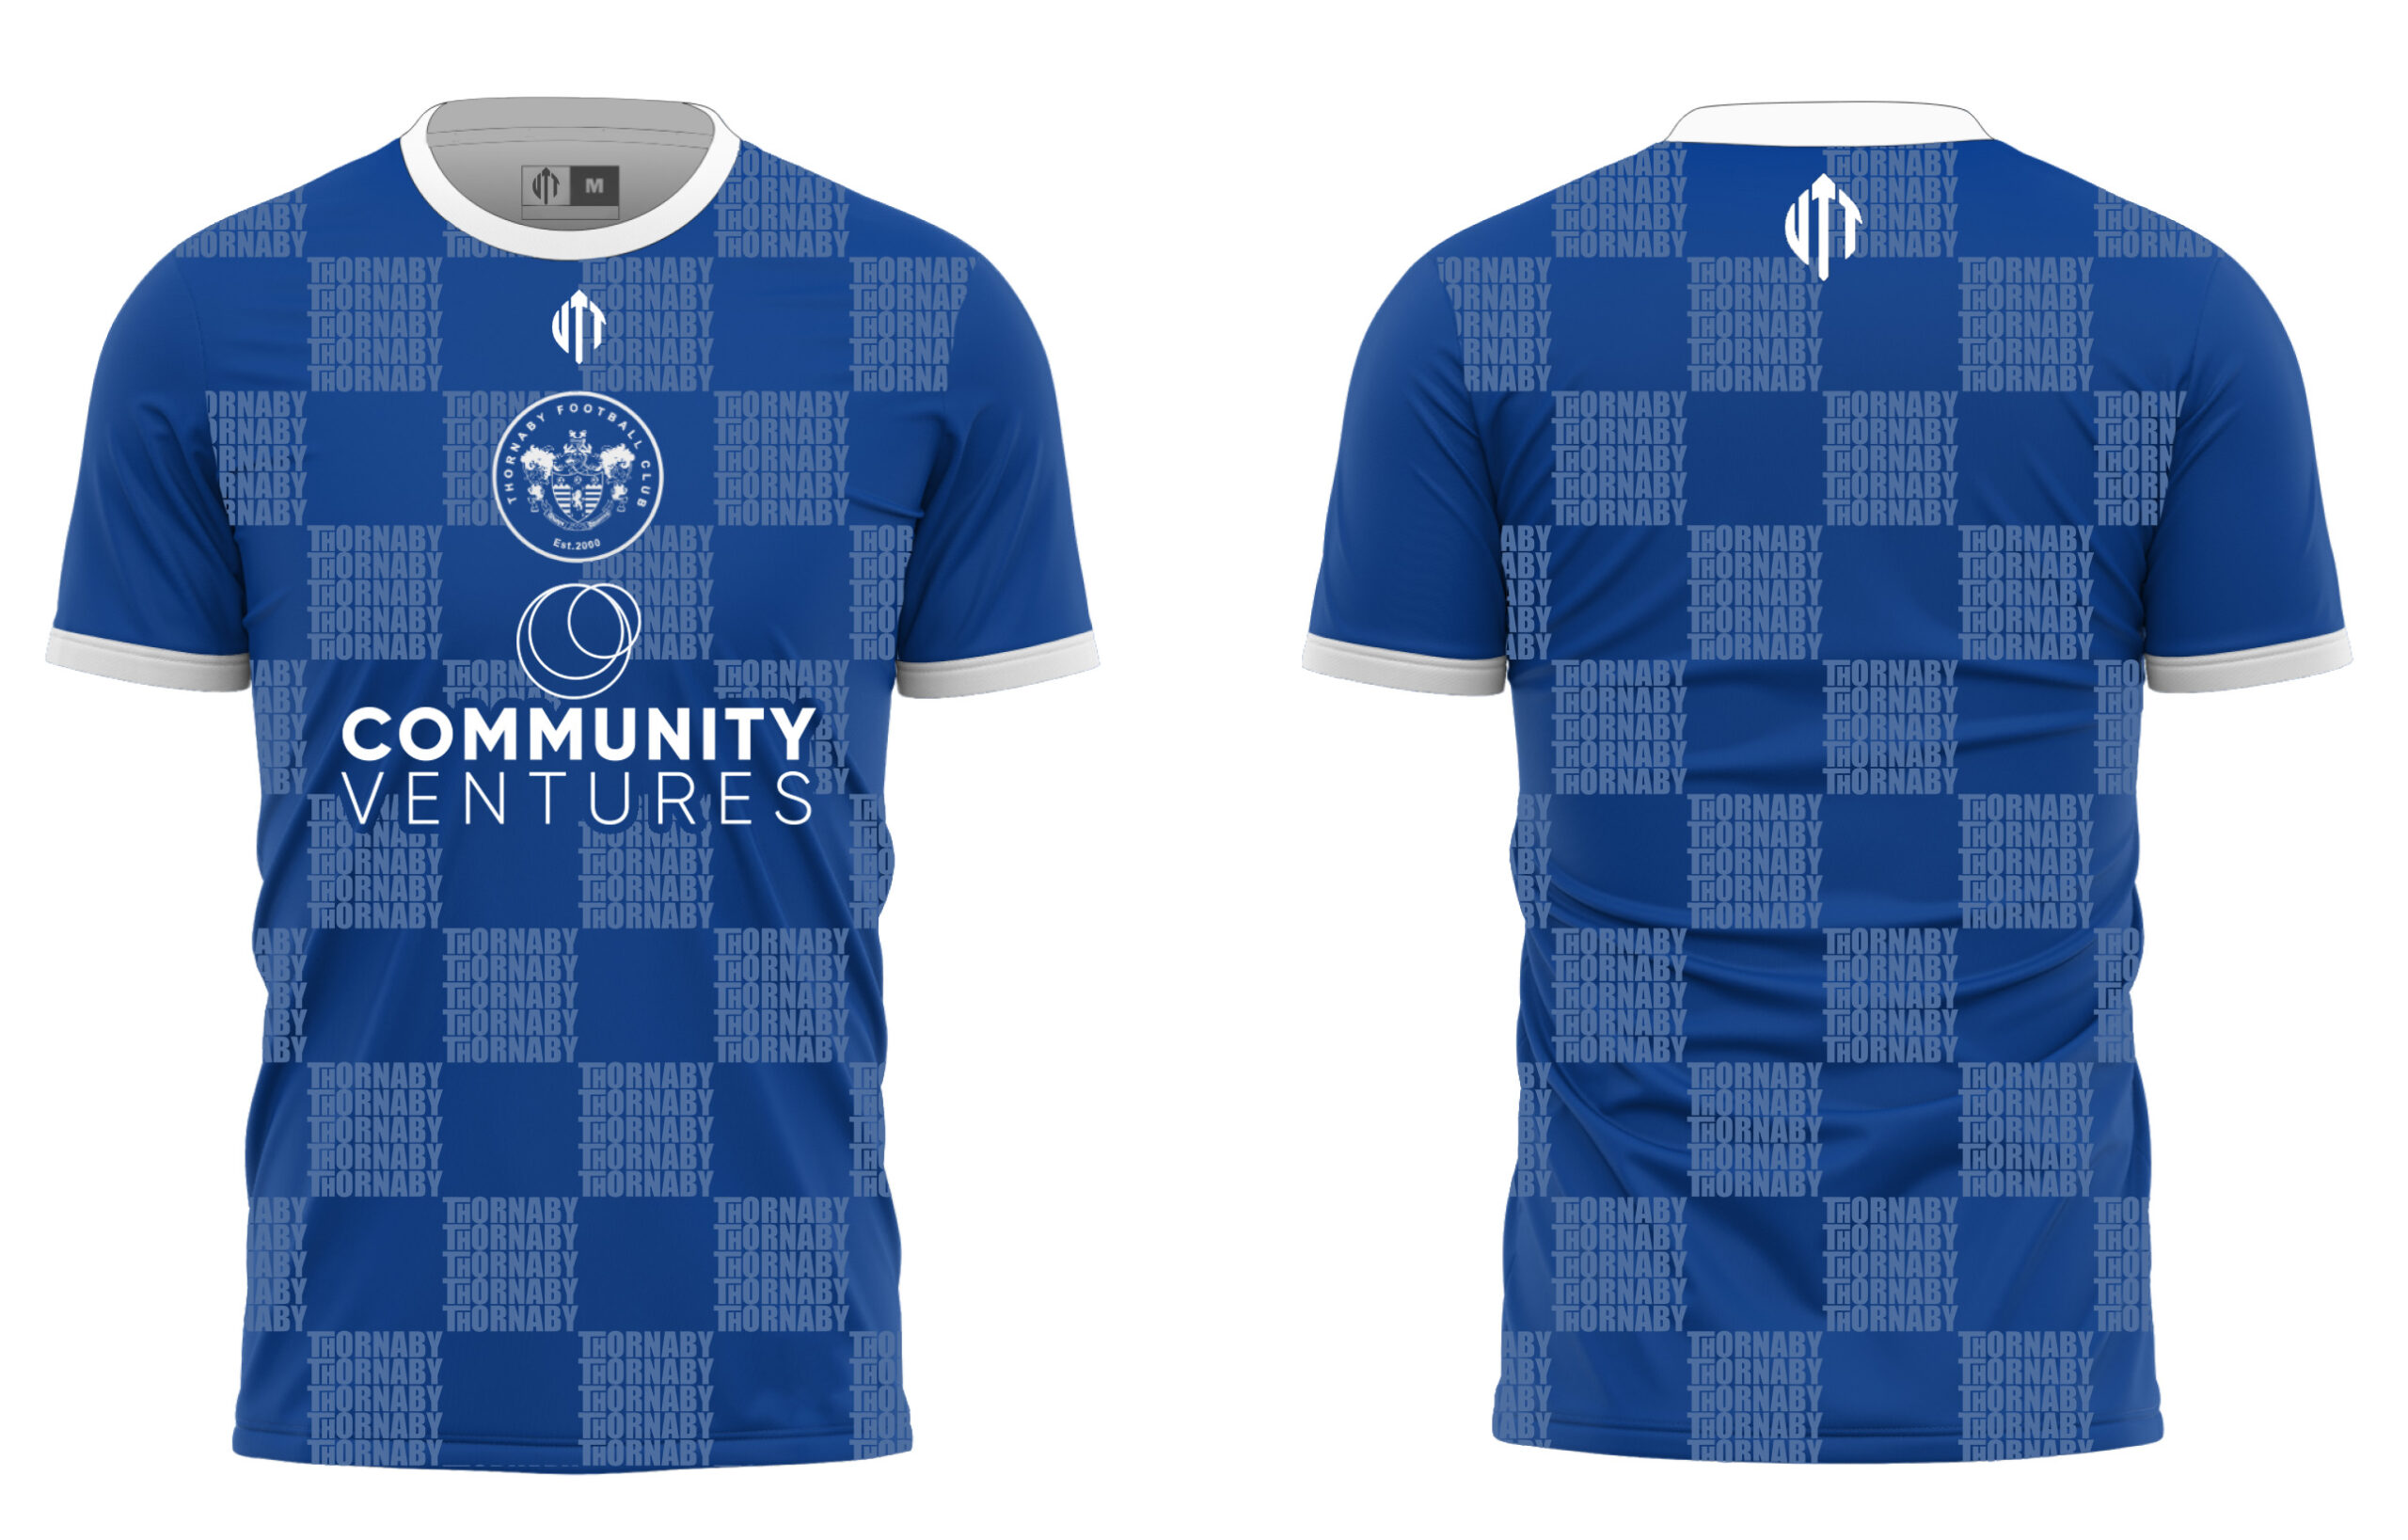 A football kit branded with the Community Ventures logo